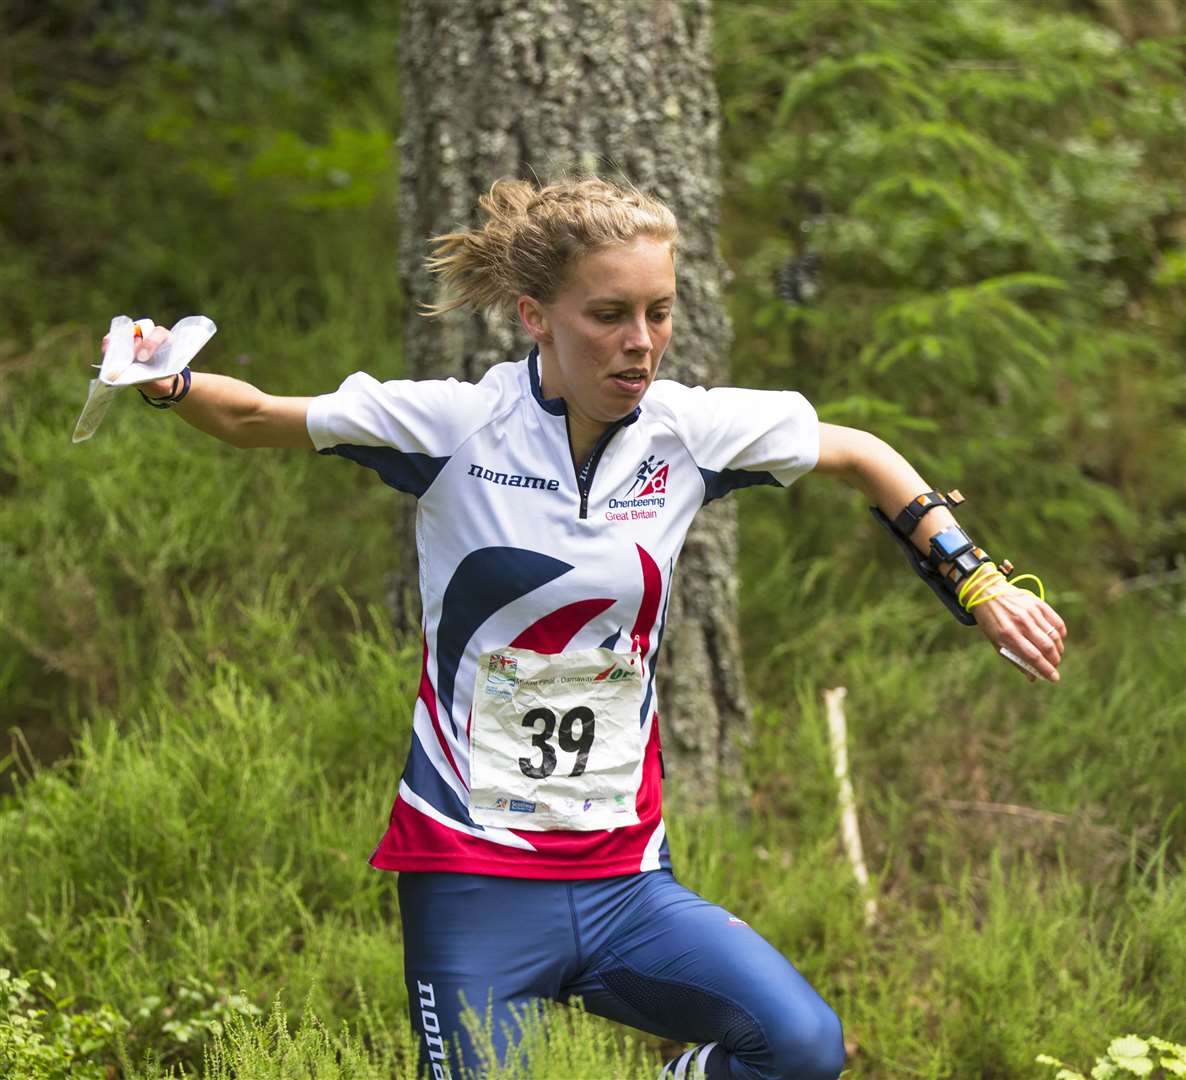 The six-day Scottish Orienteering Championships come to Moray.